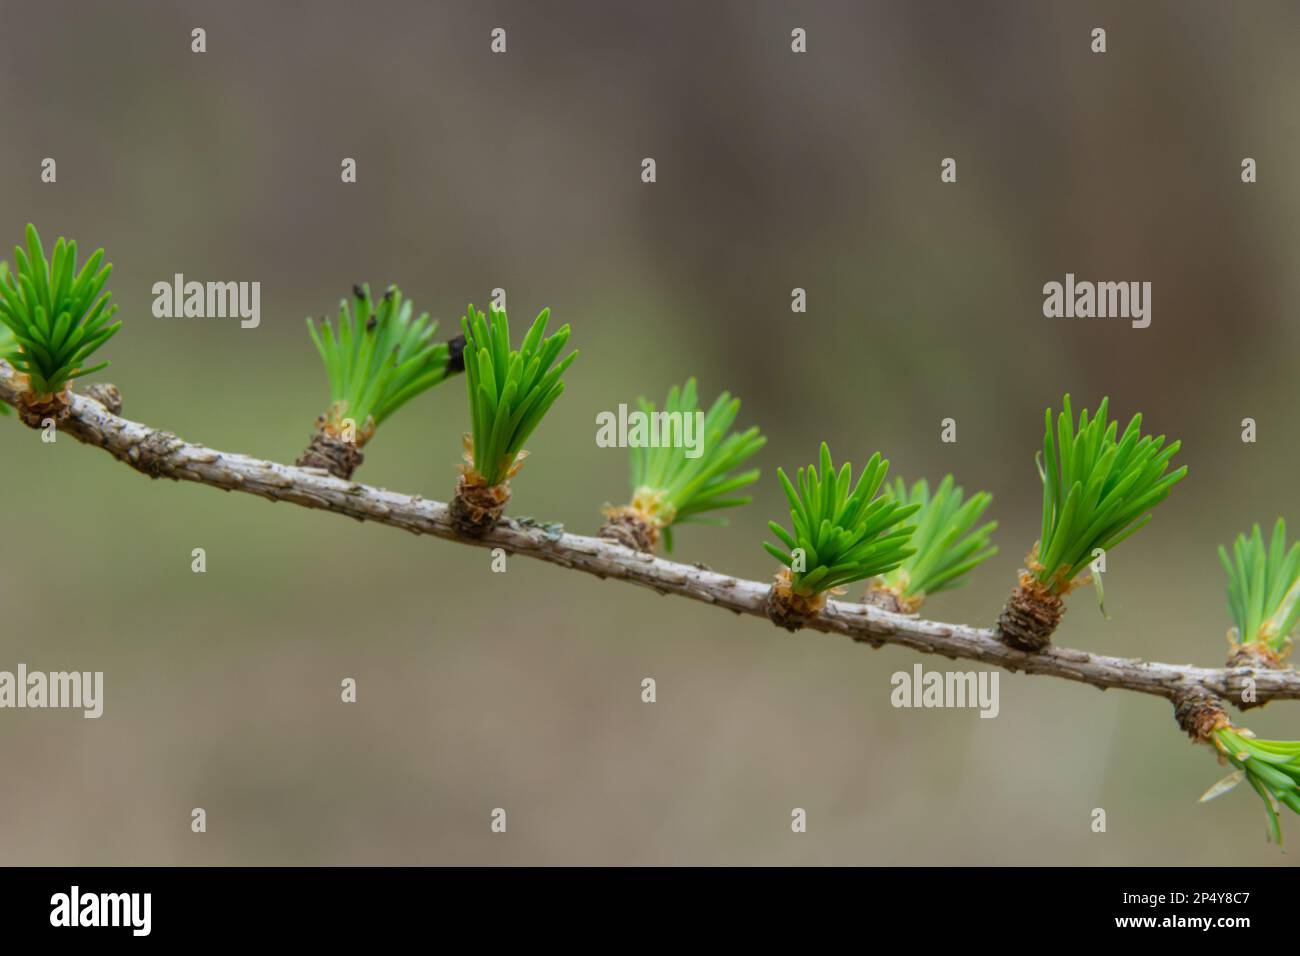 A young branch of a flowering larch on a Sunny spring day. Stock Photo